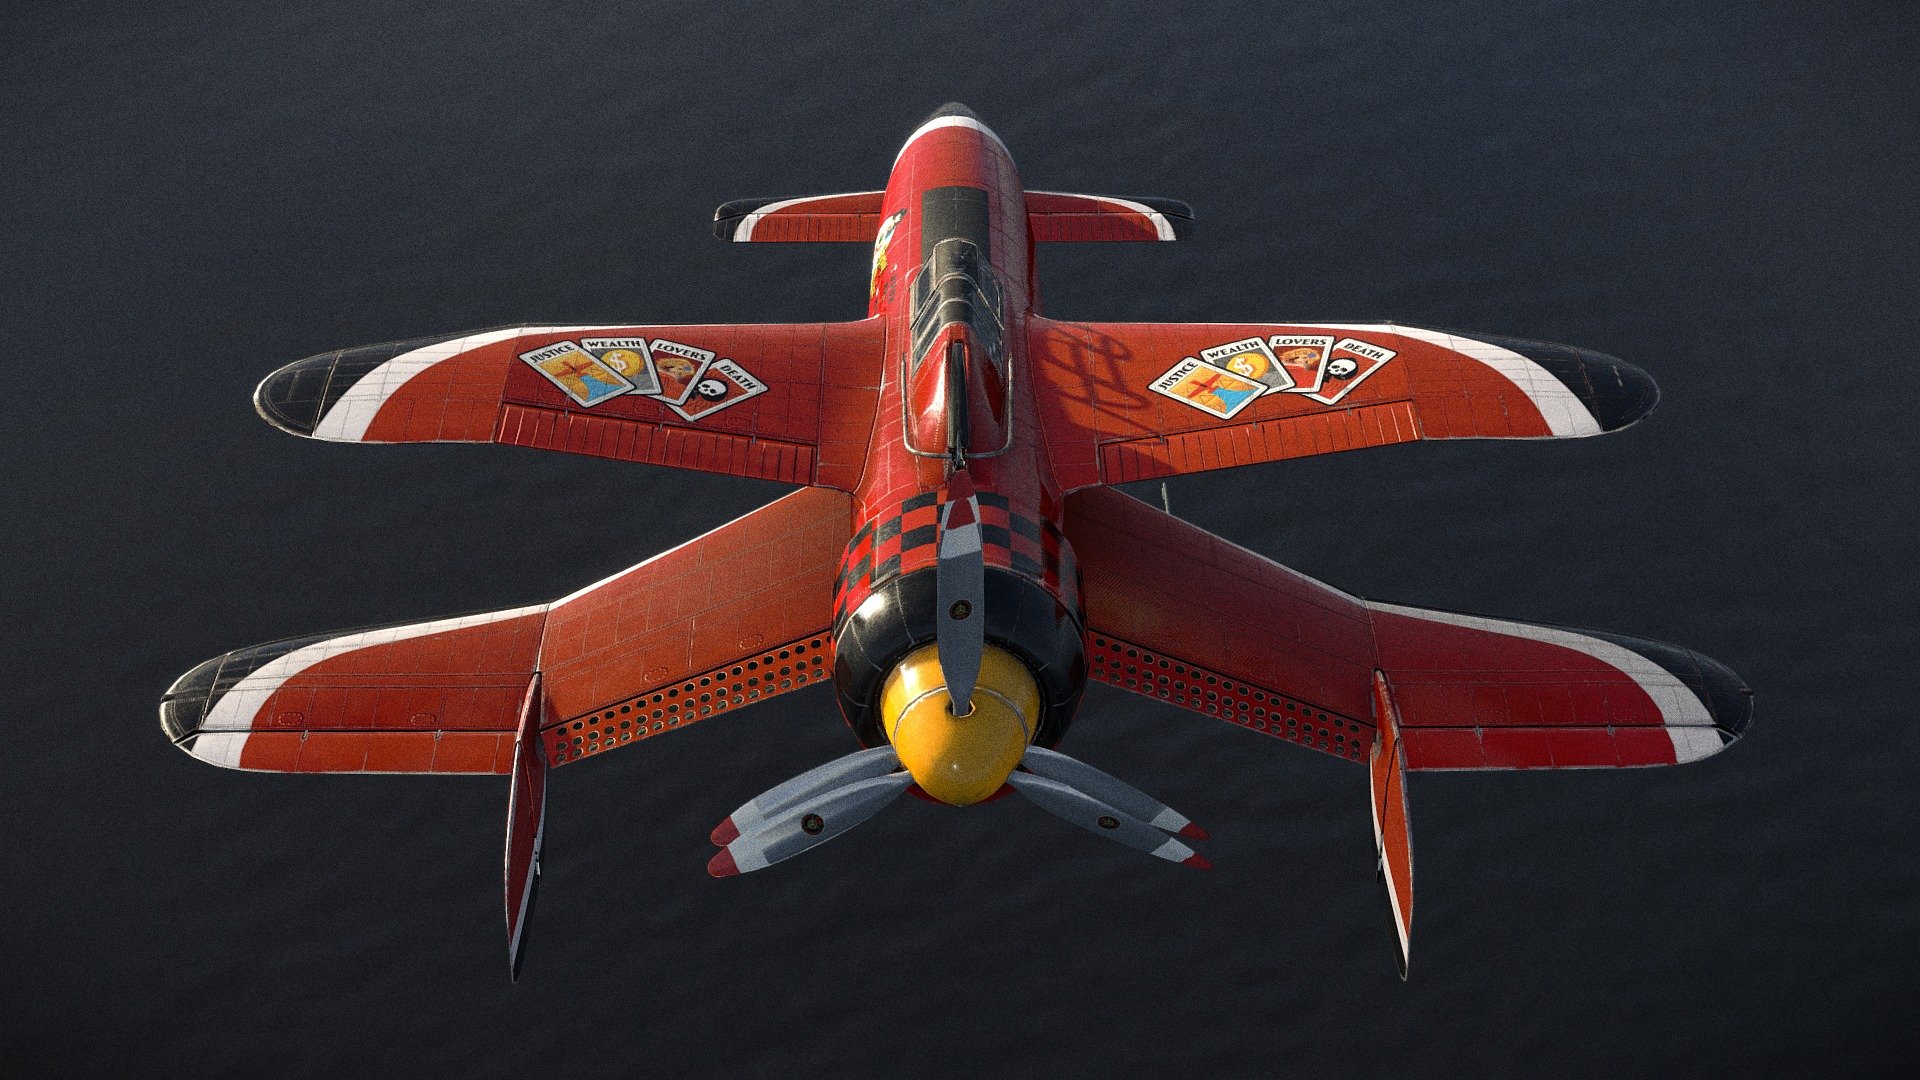 As the other iconic aircraft of “Crimson Skies,” the Hughes P21-J Devastator simultaneously possesses a fantastical X-wing look, but also a &ldquo;this could totally exist